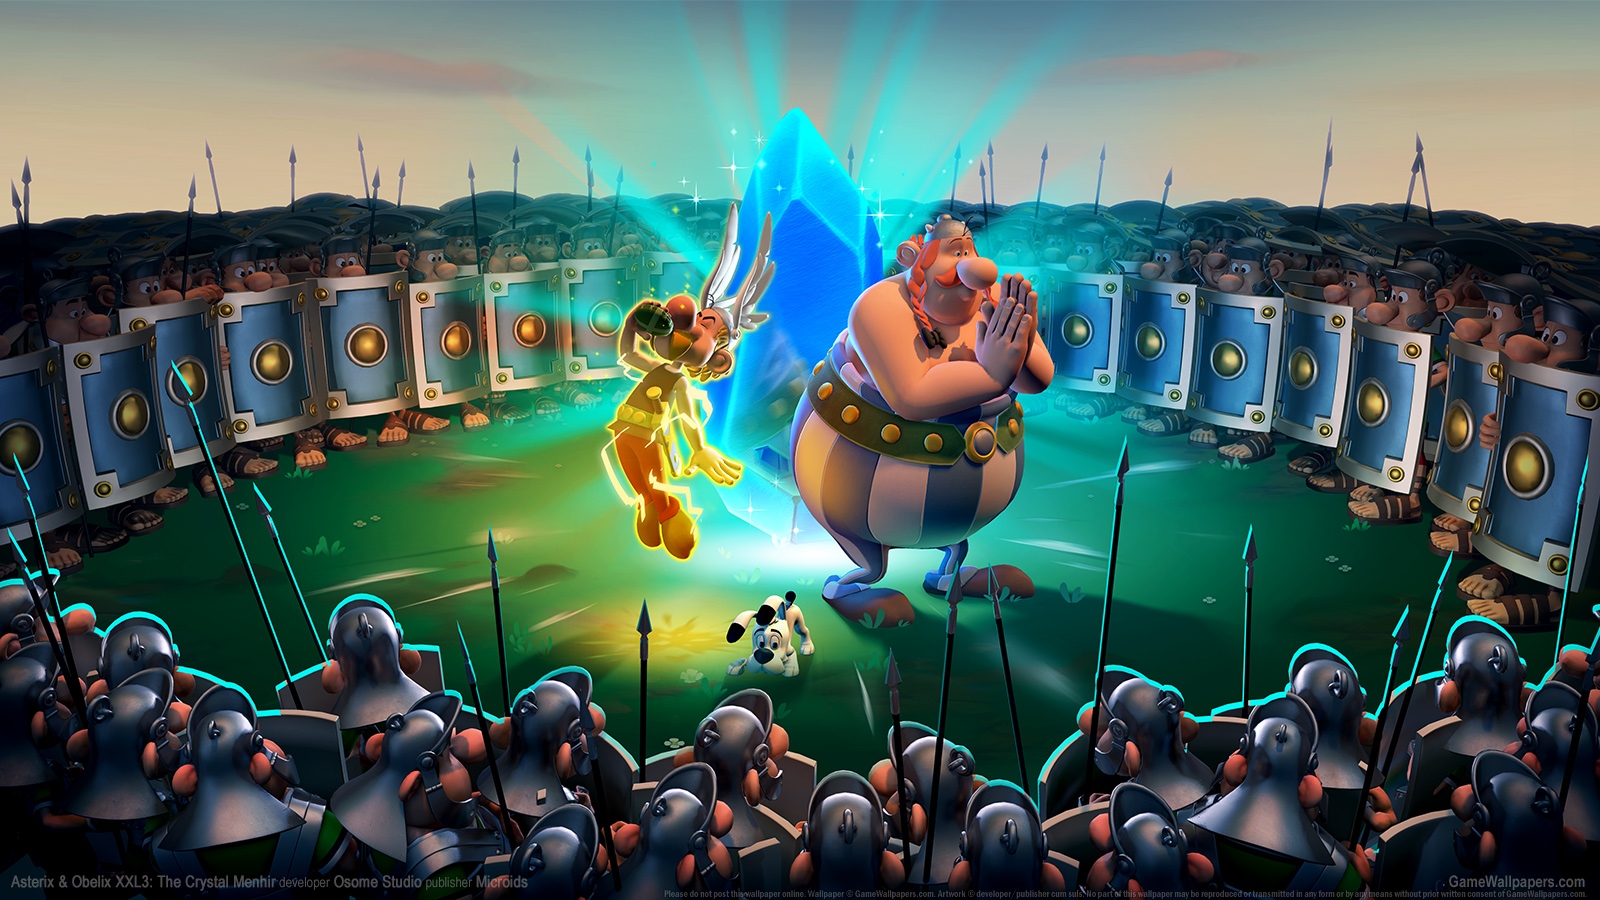 Asterix & Obelix XXL3: The Crystal Menhir 1600x900 wallpaper or background 01